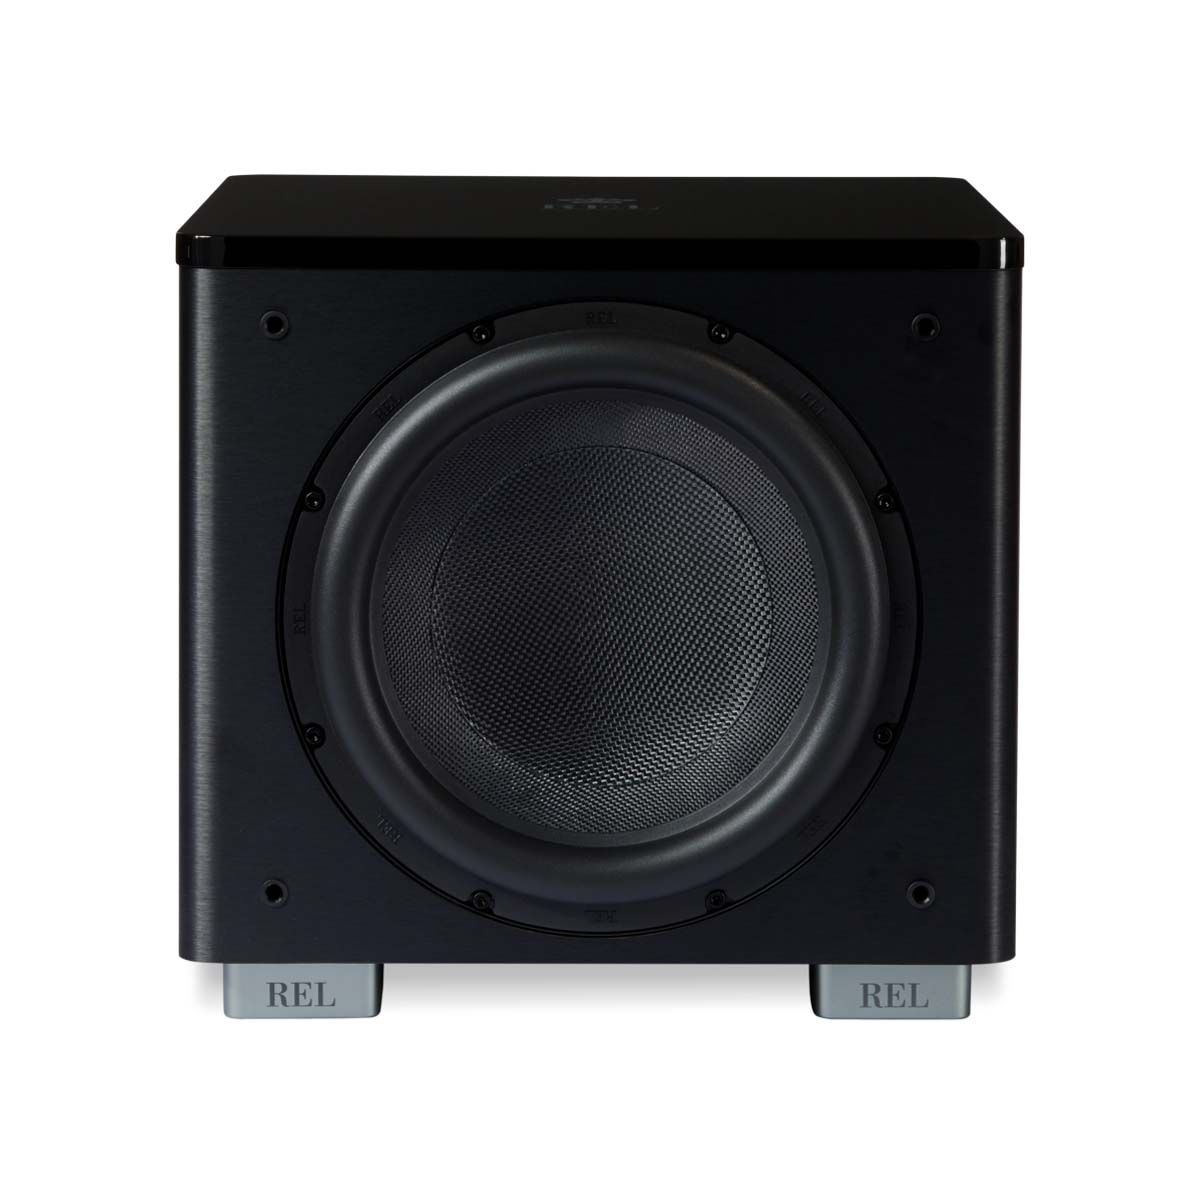 REL Acoustics HT/1205 MKII Subwoofer - front view without grille